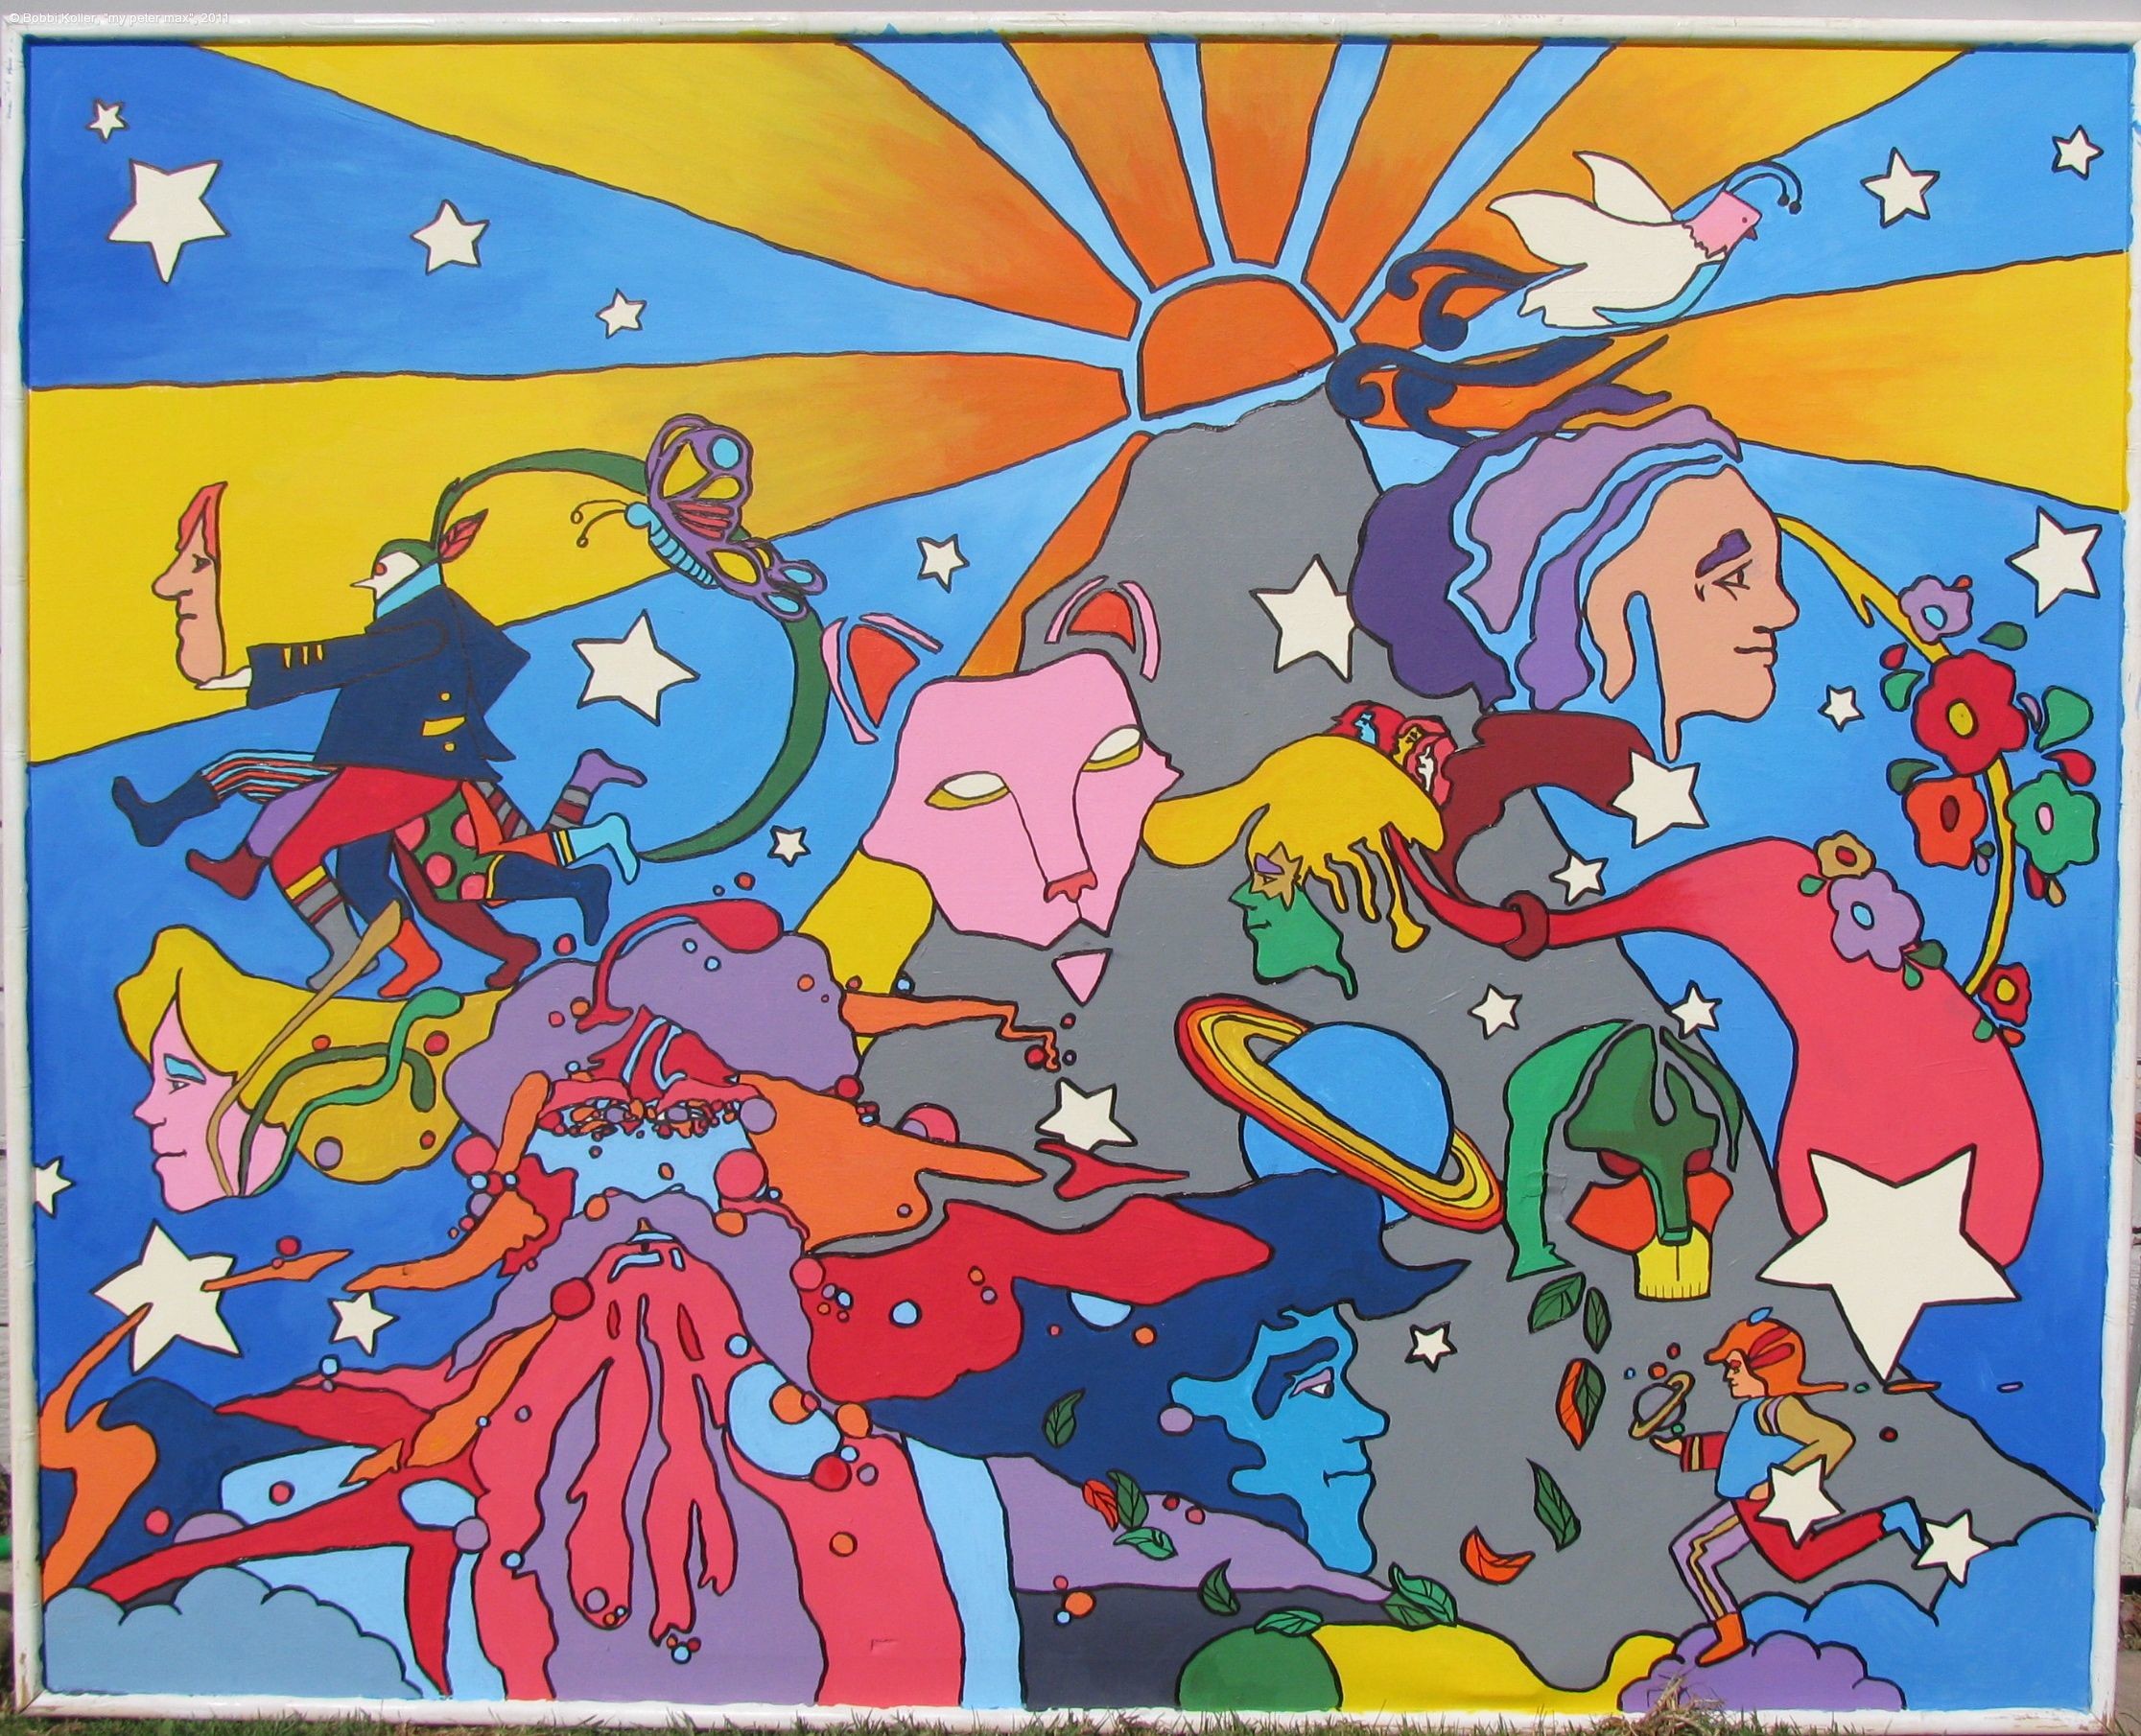 2232x1810 Images for peter max illustration peter max peter max art jpg  Peter  max art wallpaper